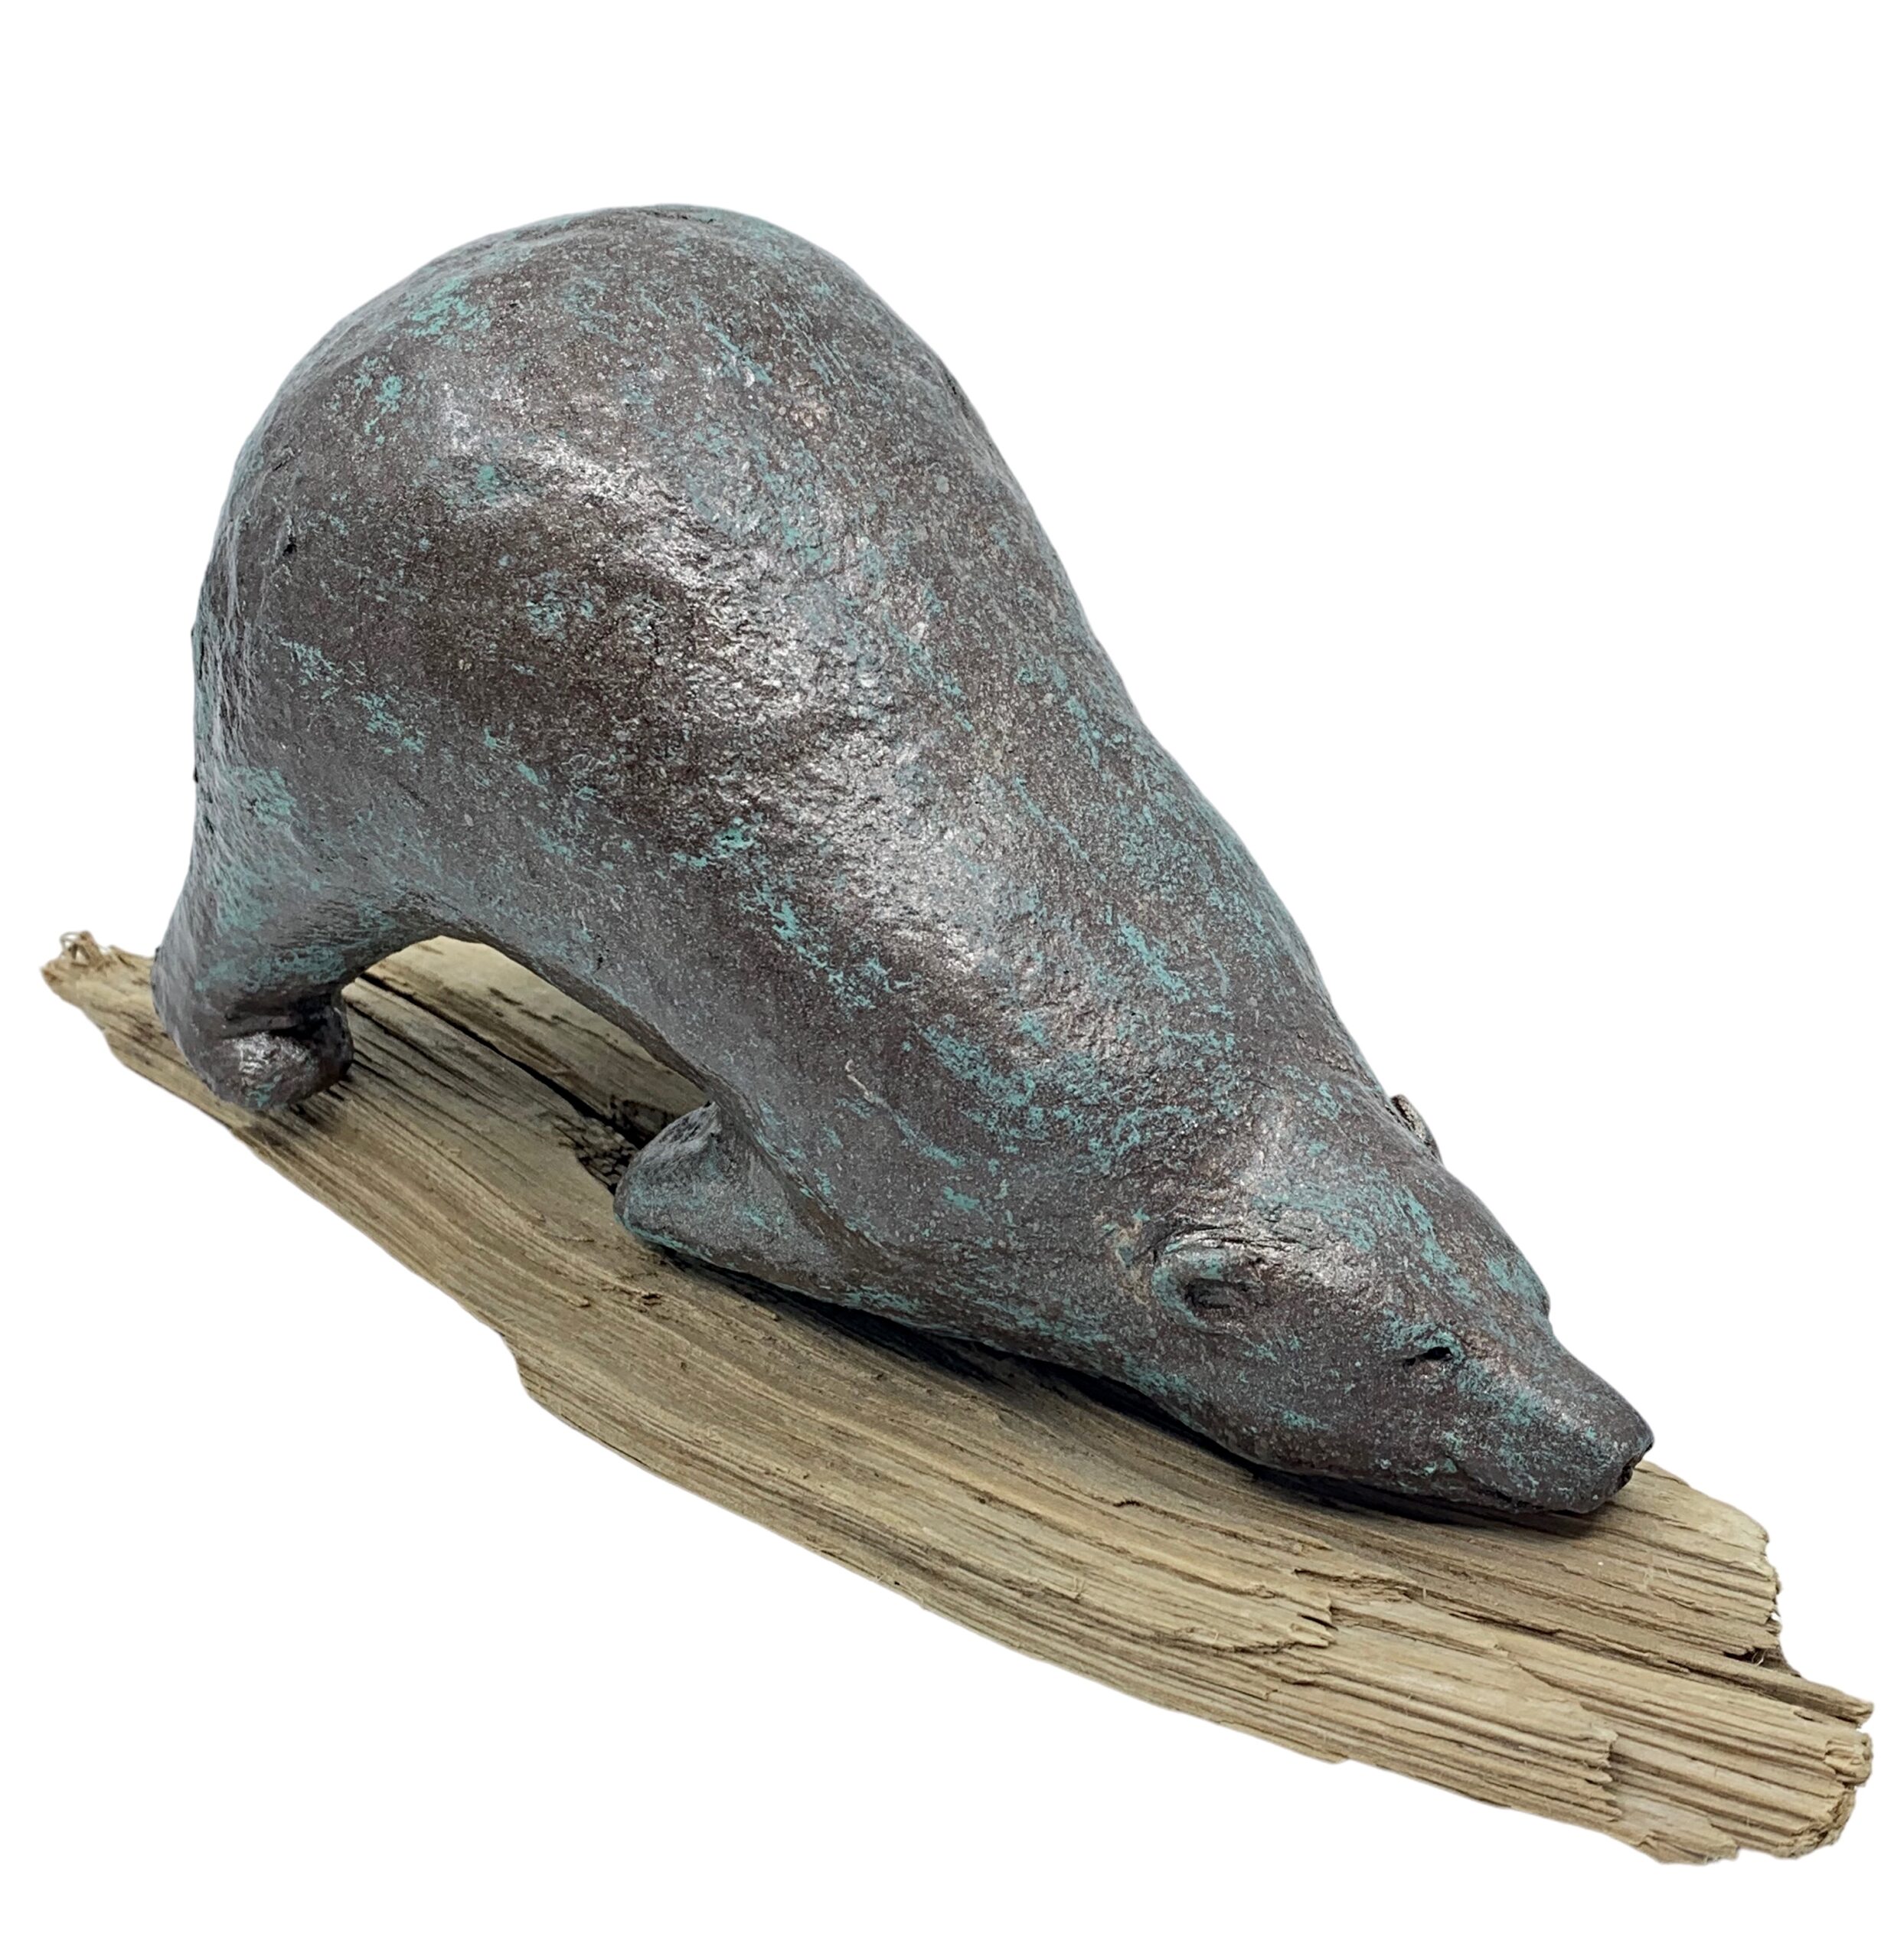 Sculpture of a whimsical friendly bear in the downward dog yoga pose on a driftwood yoga mat, with a bronze patina finish by Karin Taylor.